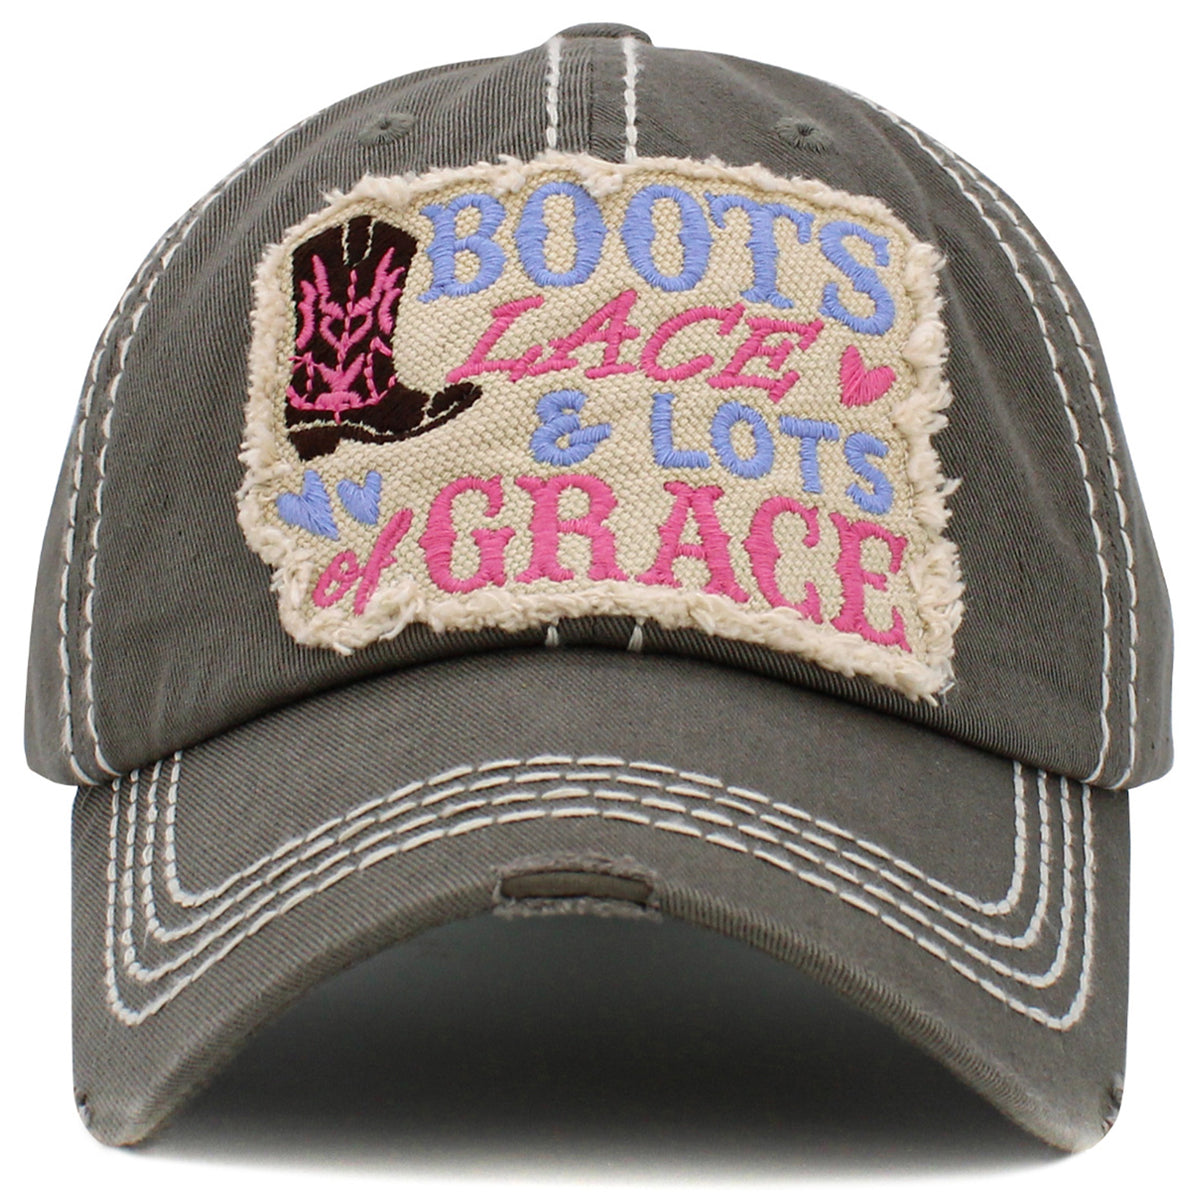 1491 - Boots Lace & Lots of Grace Hat - Mos